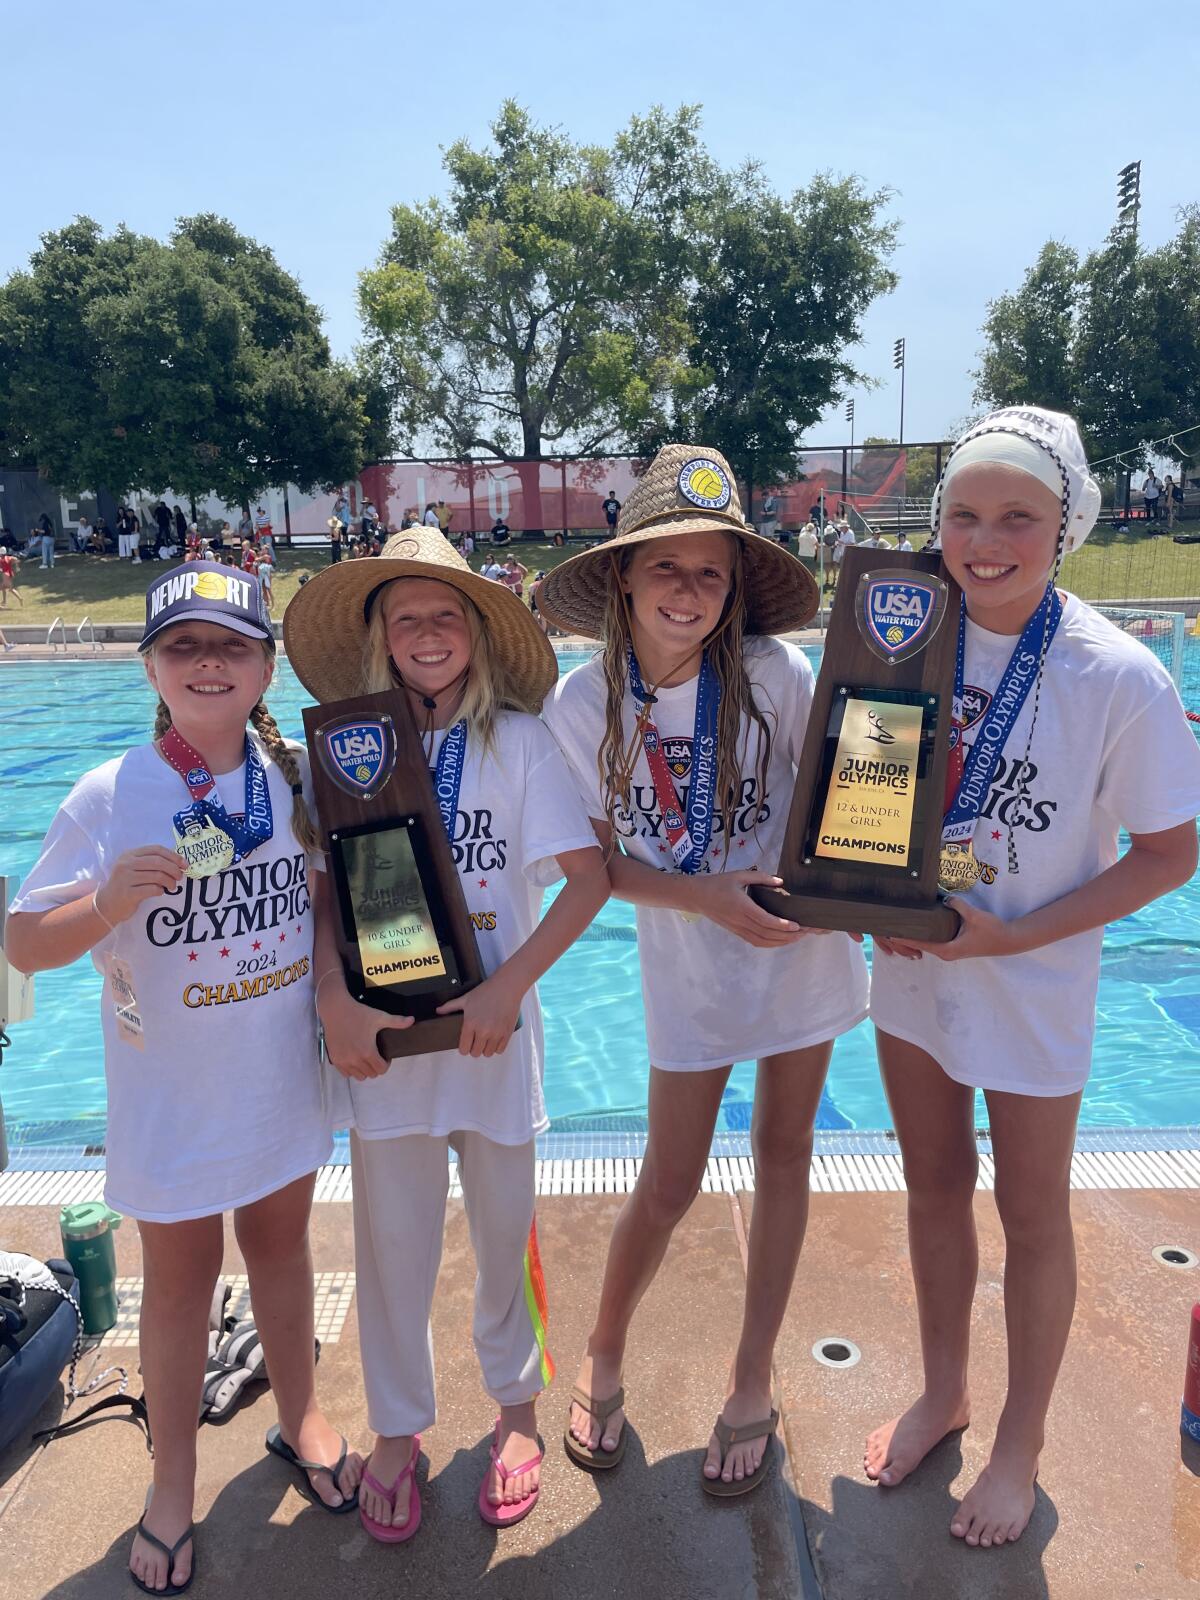 The Doyle and Mesenbrink sisters helped the Newport Beach 10U and 12U girls, respectively, earn gold medals.